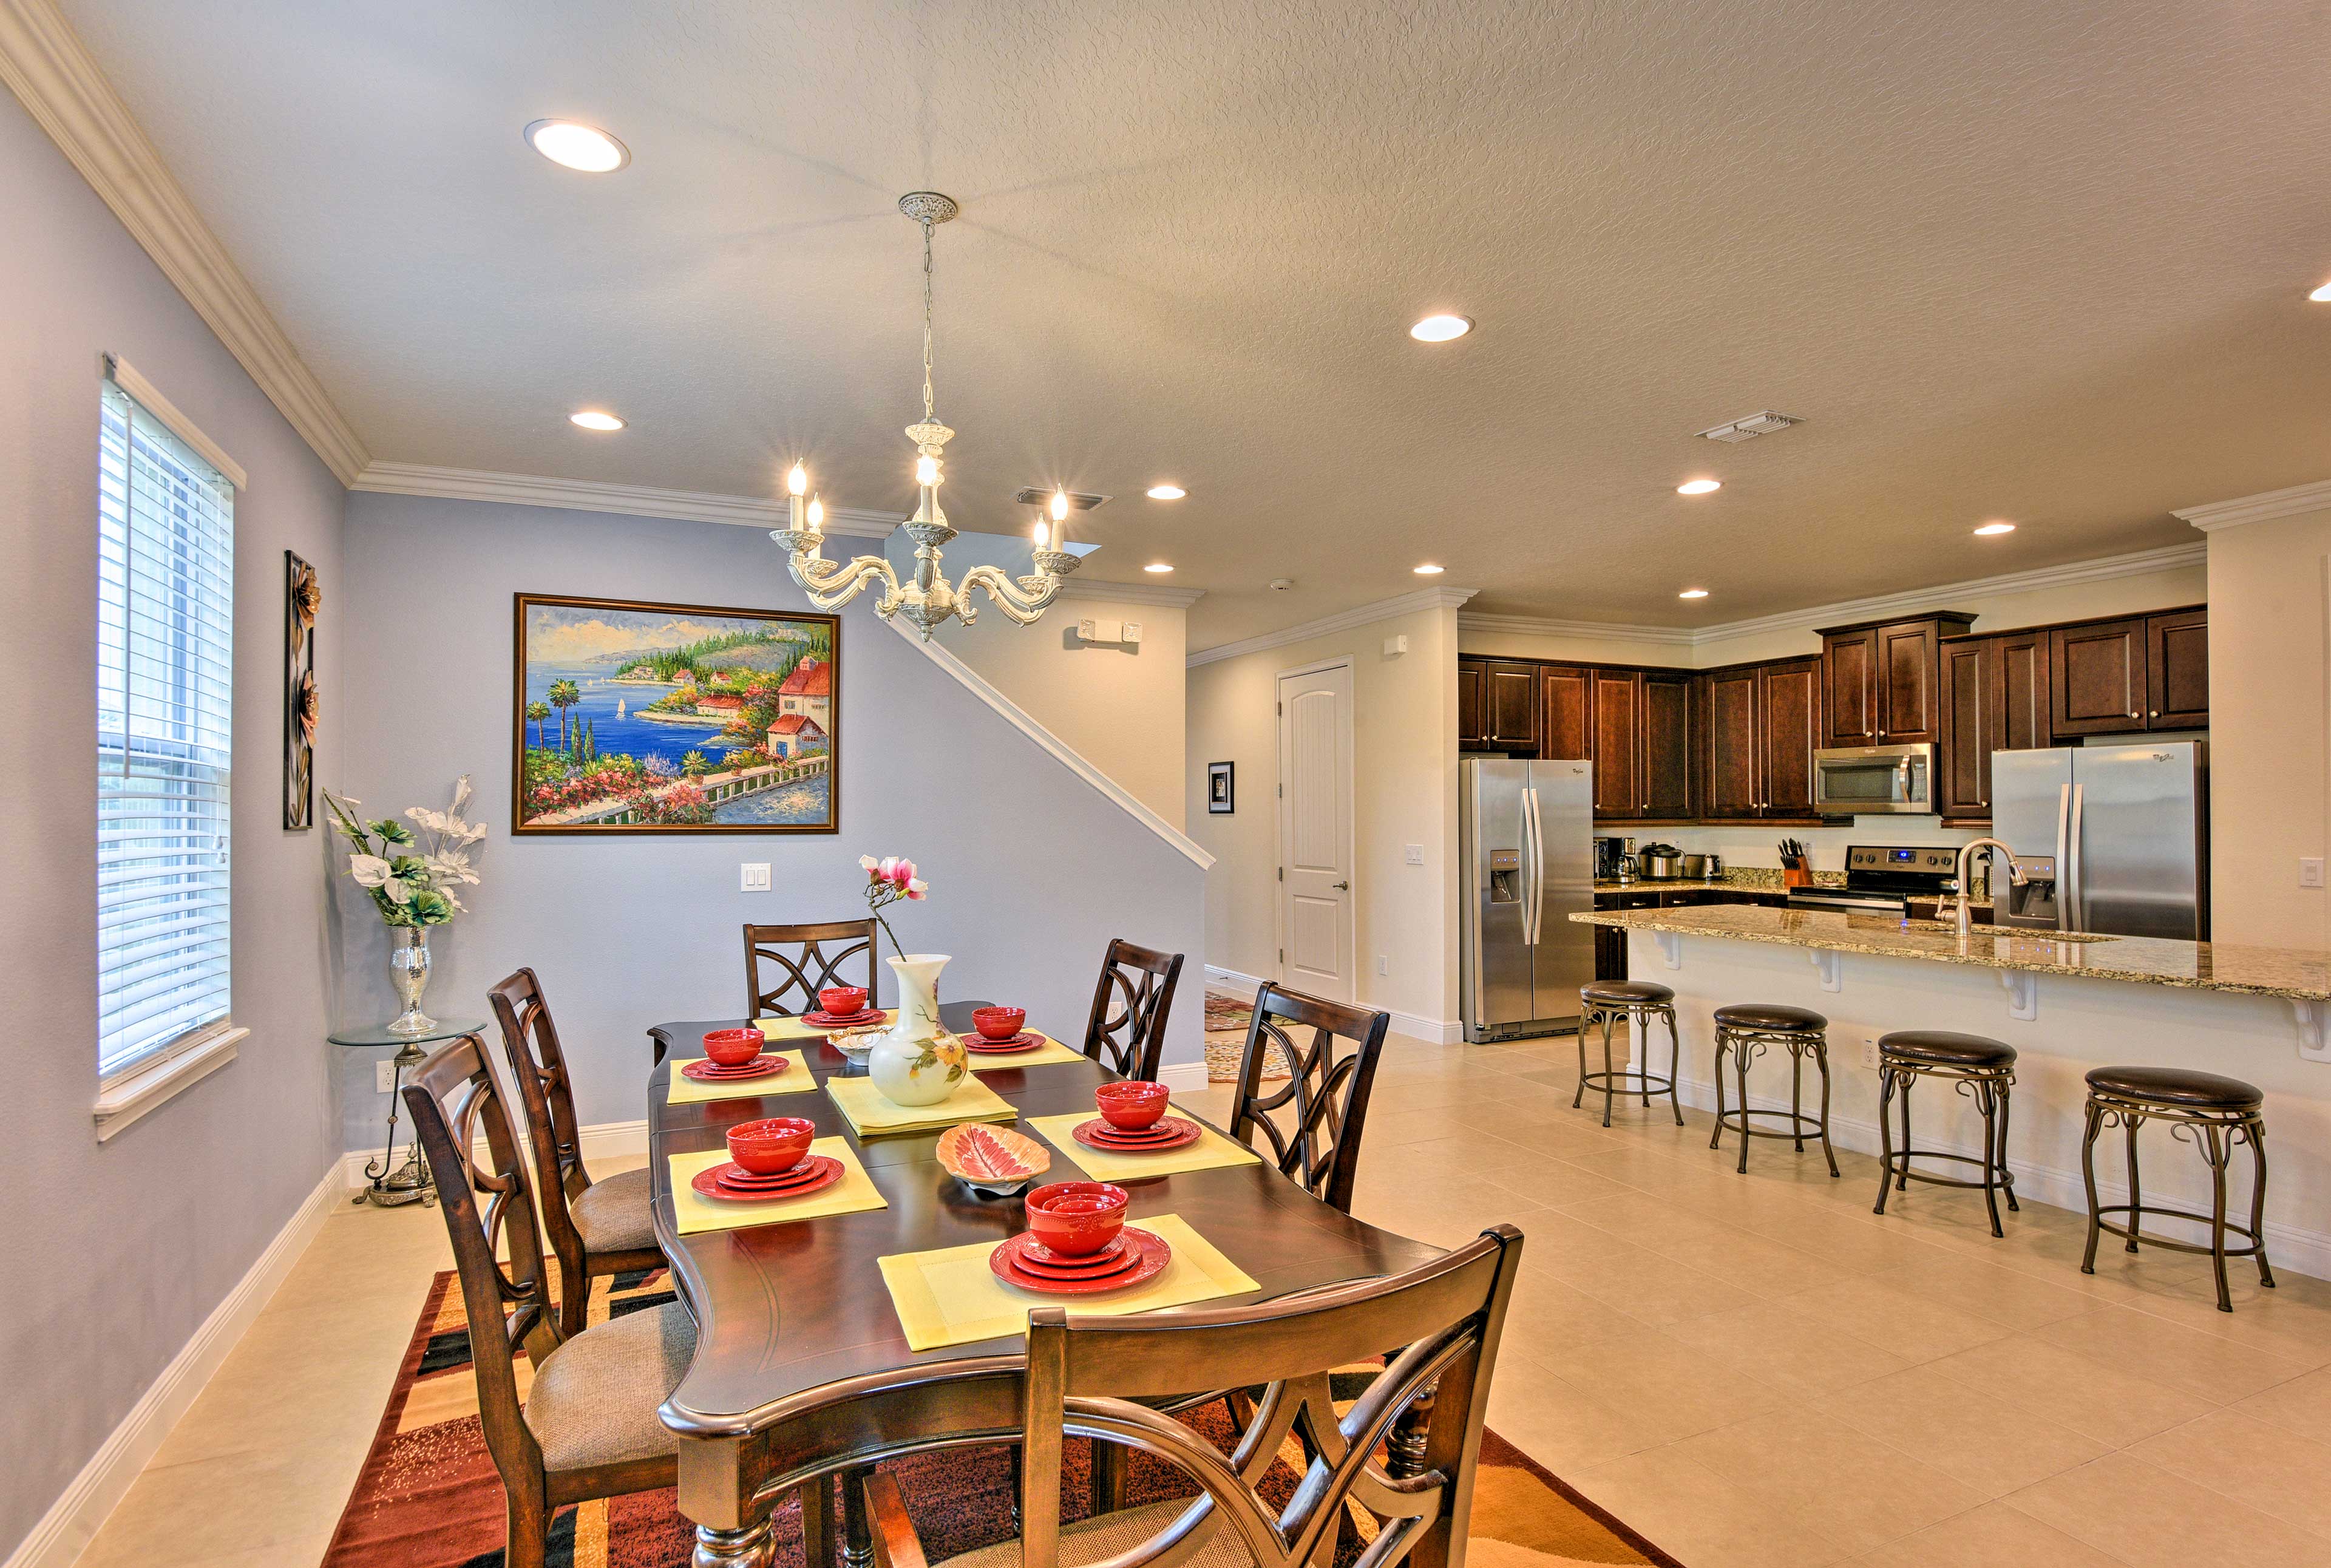 Savor homemade family meals around the 6-person dining table.